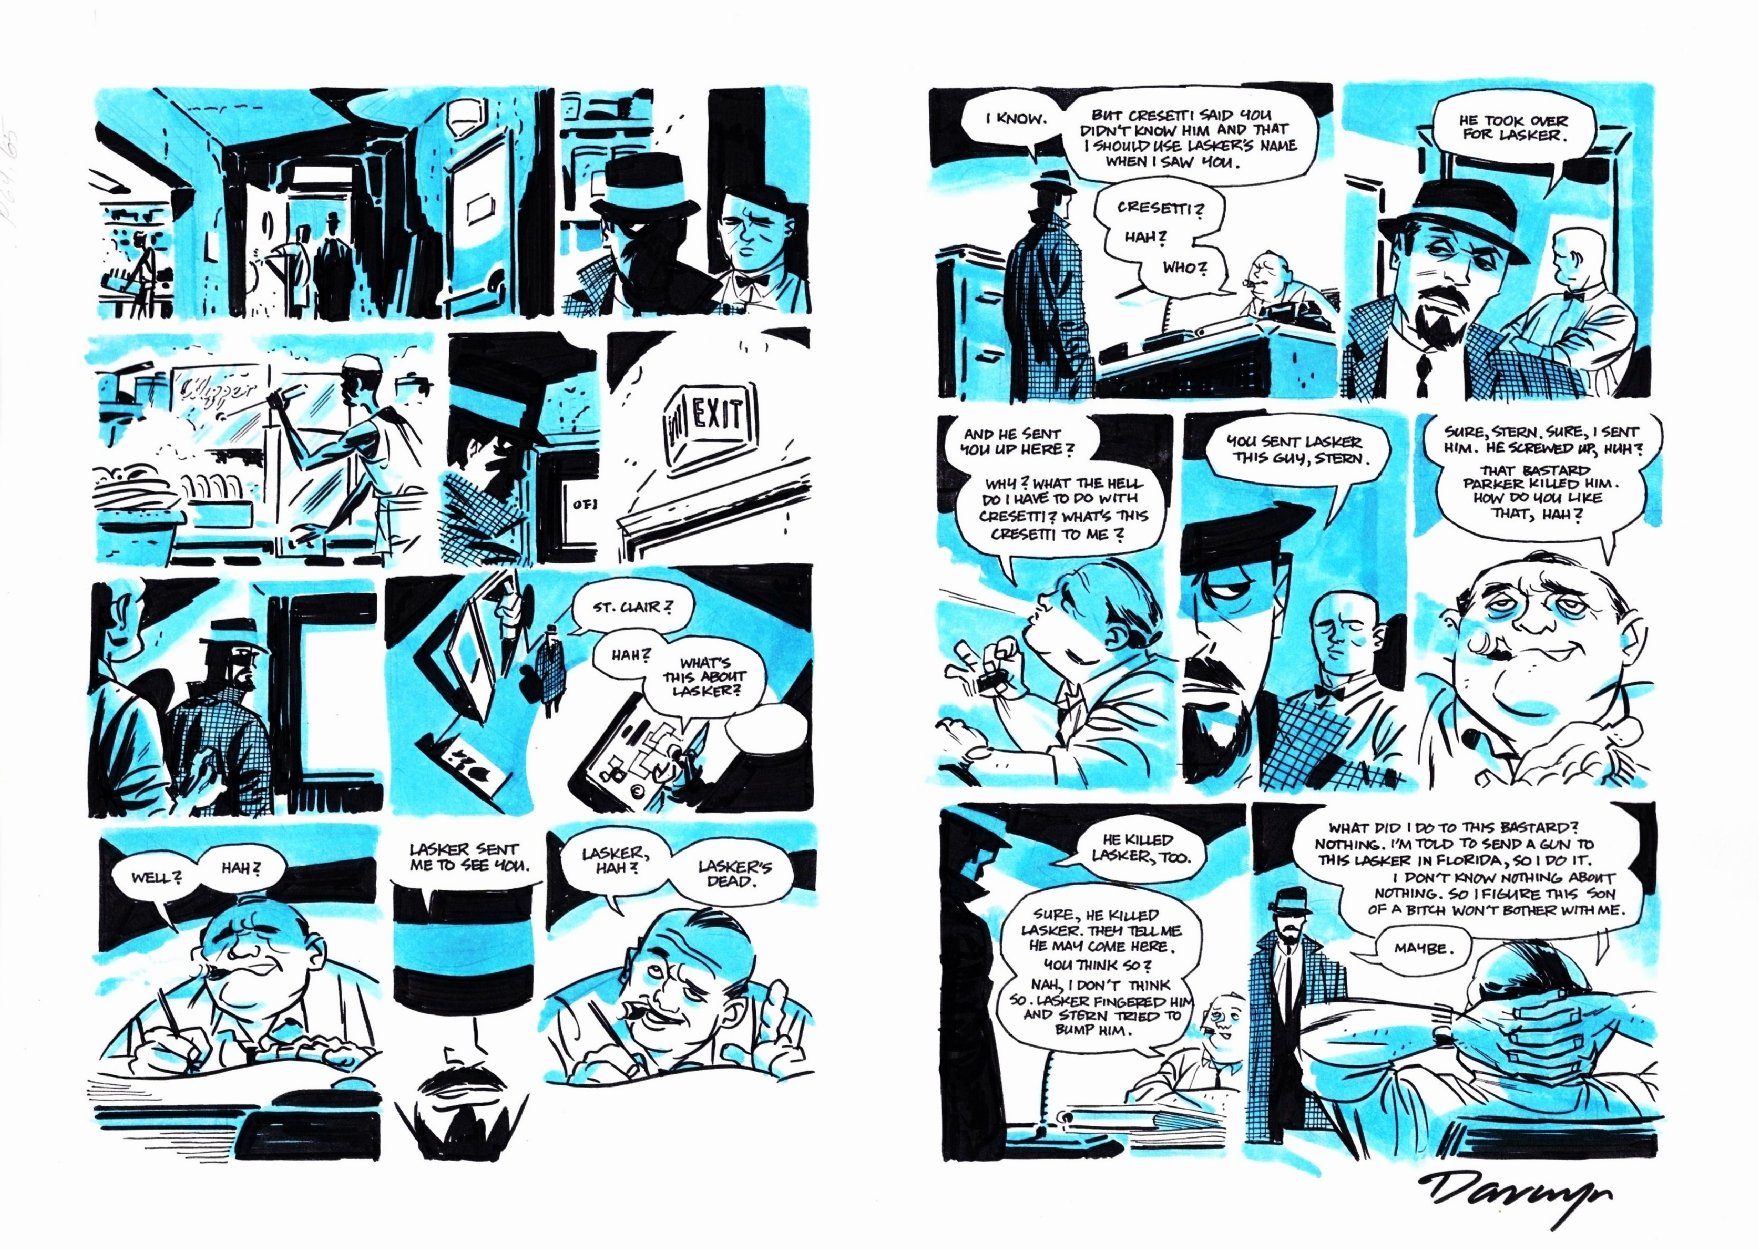 Darwyn Cooke Parker The Outfit Page 64 And 65 In C S Font Color 0x000000 Darwyn Cooke S Font Parker Comic Art Gallery Room